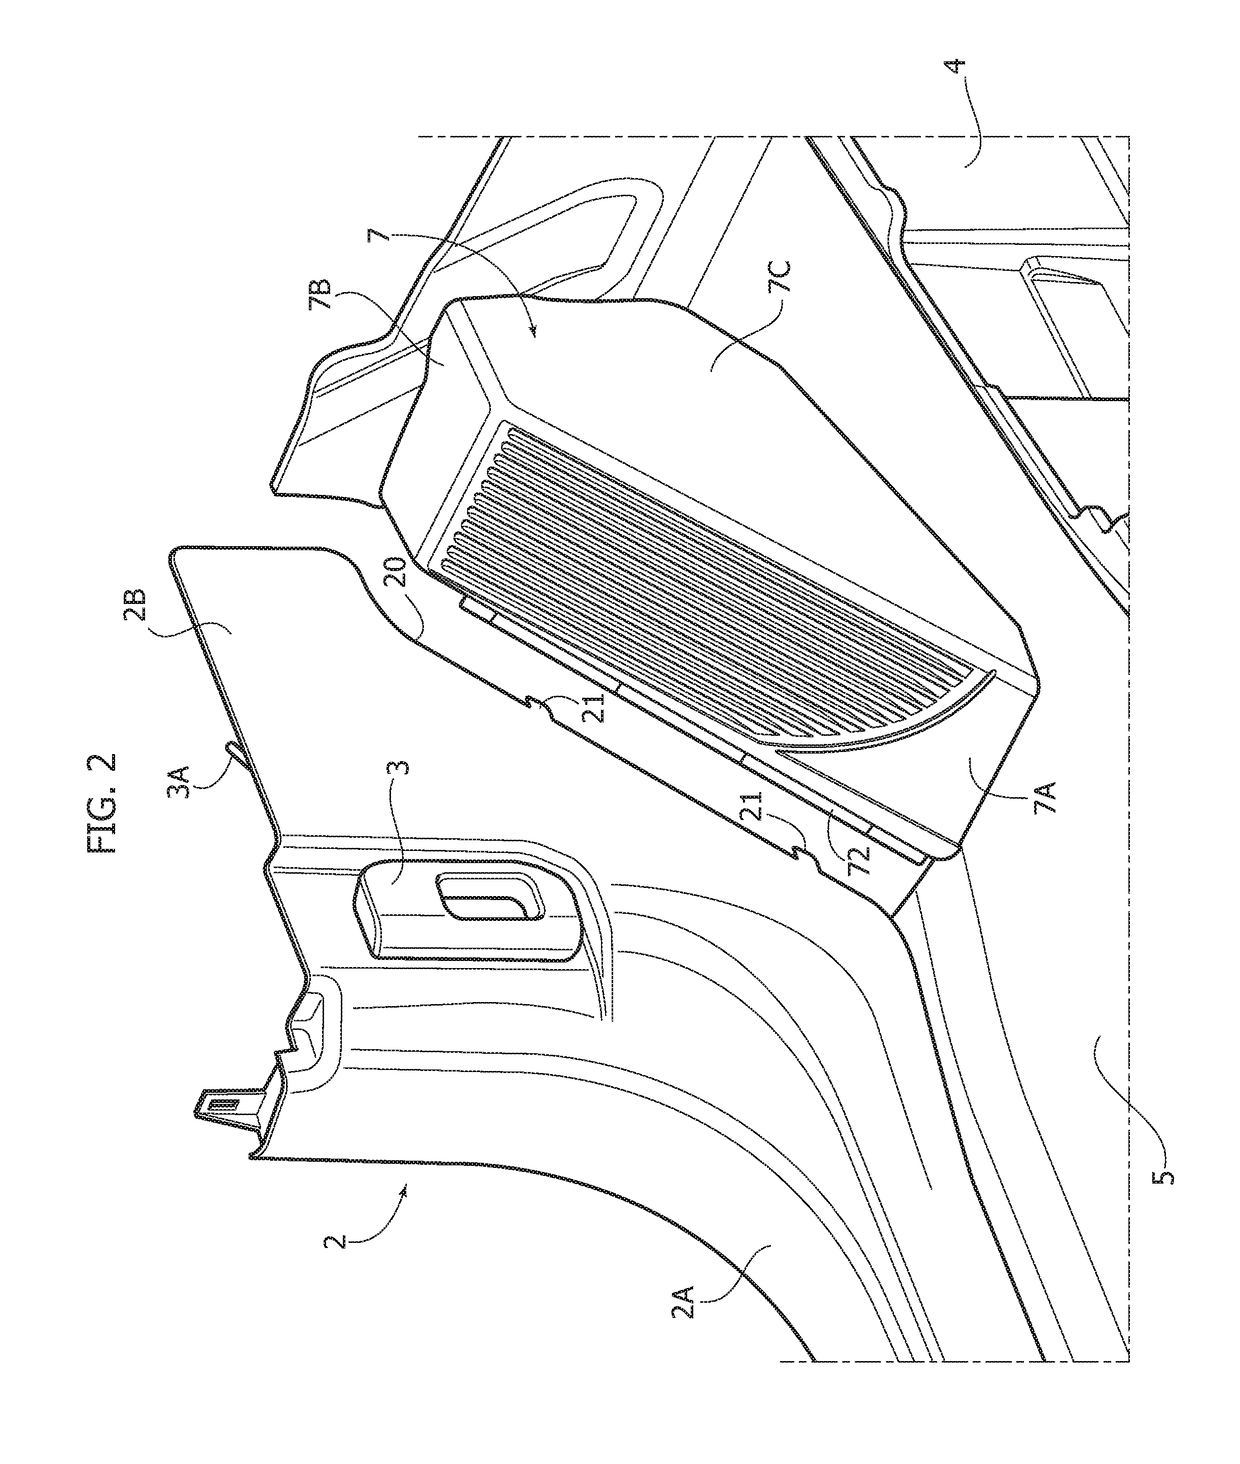 Foot-rest structure for the driving side of the floor of a motor vehicle